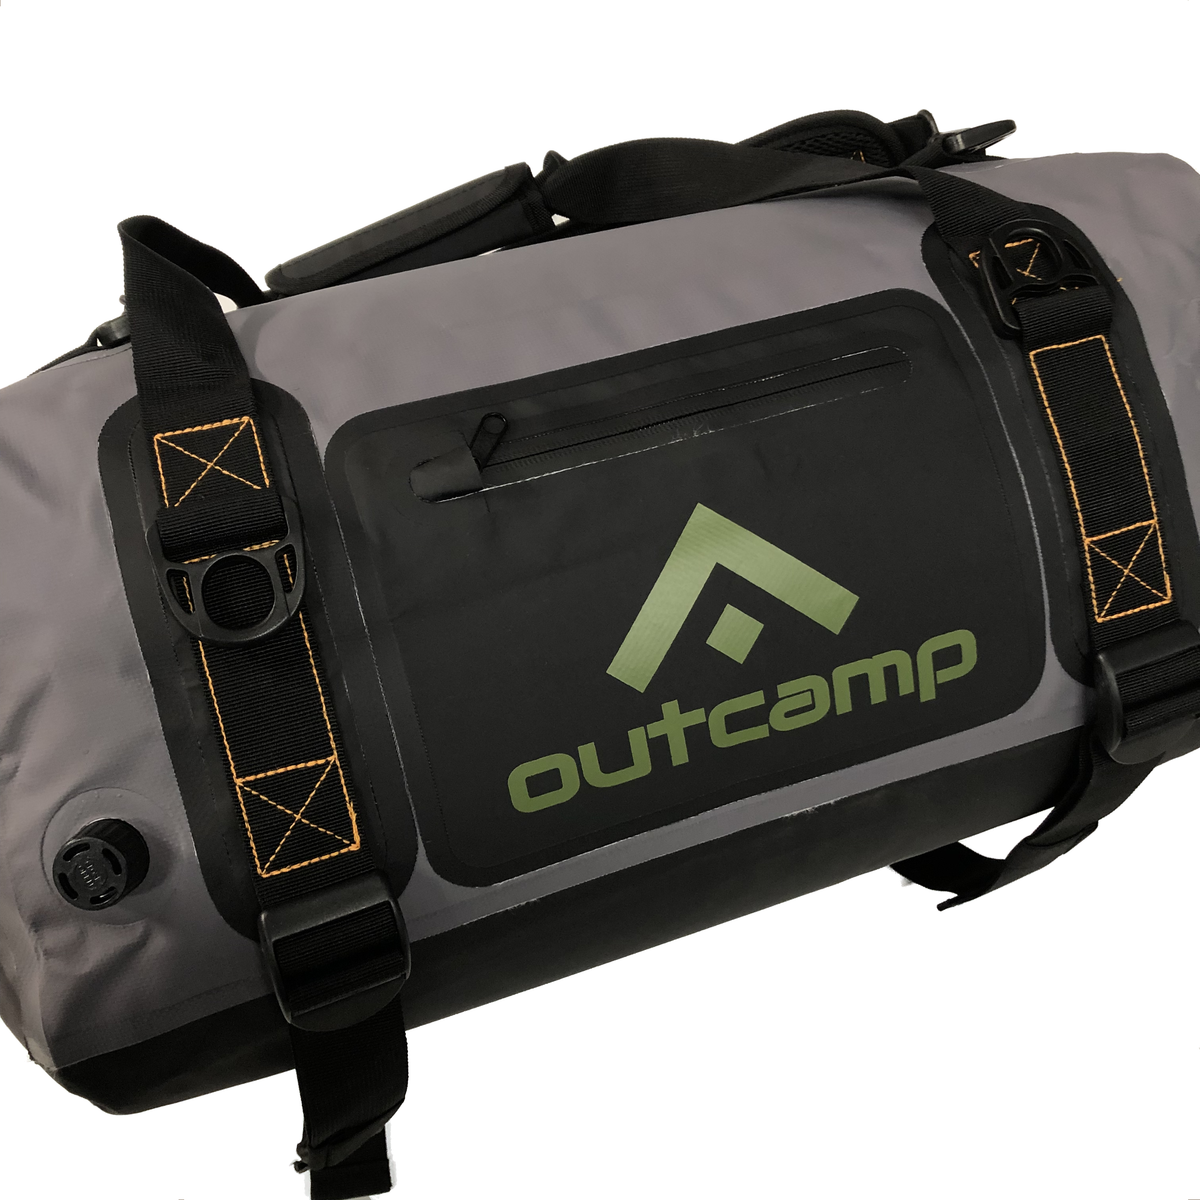 Outcamp camping bags